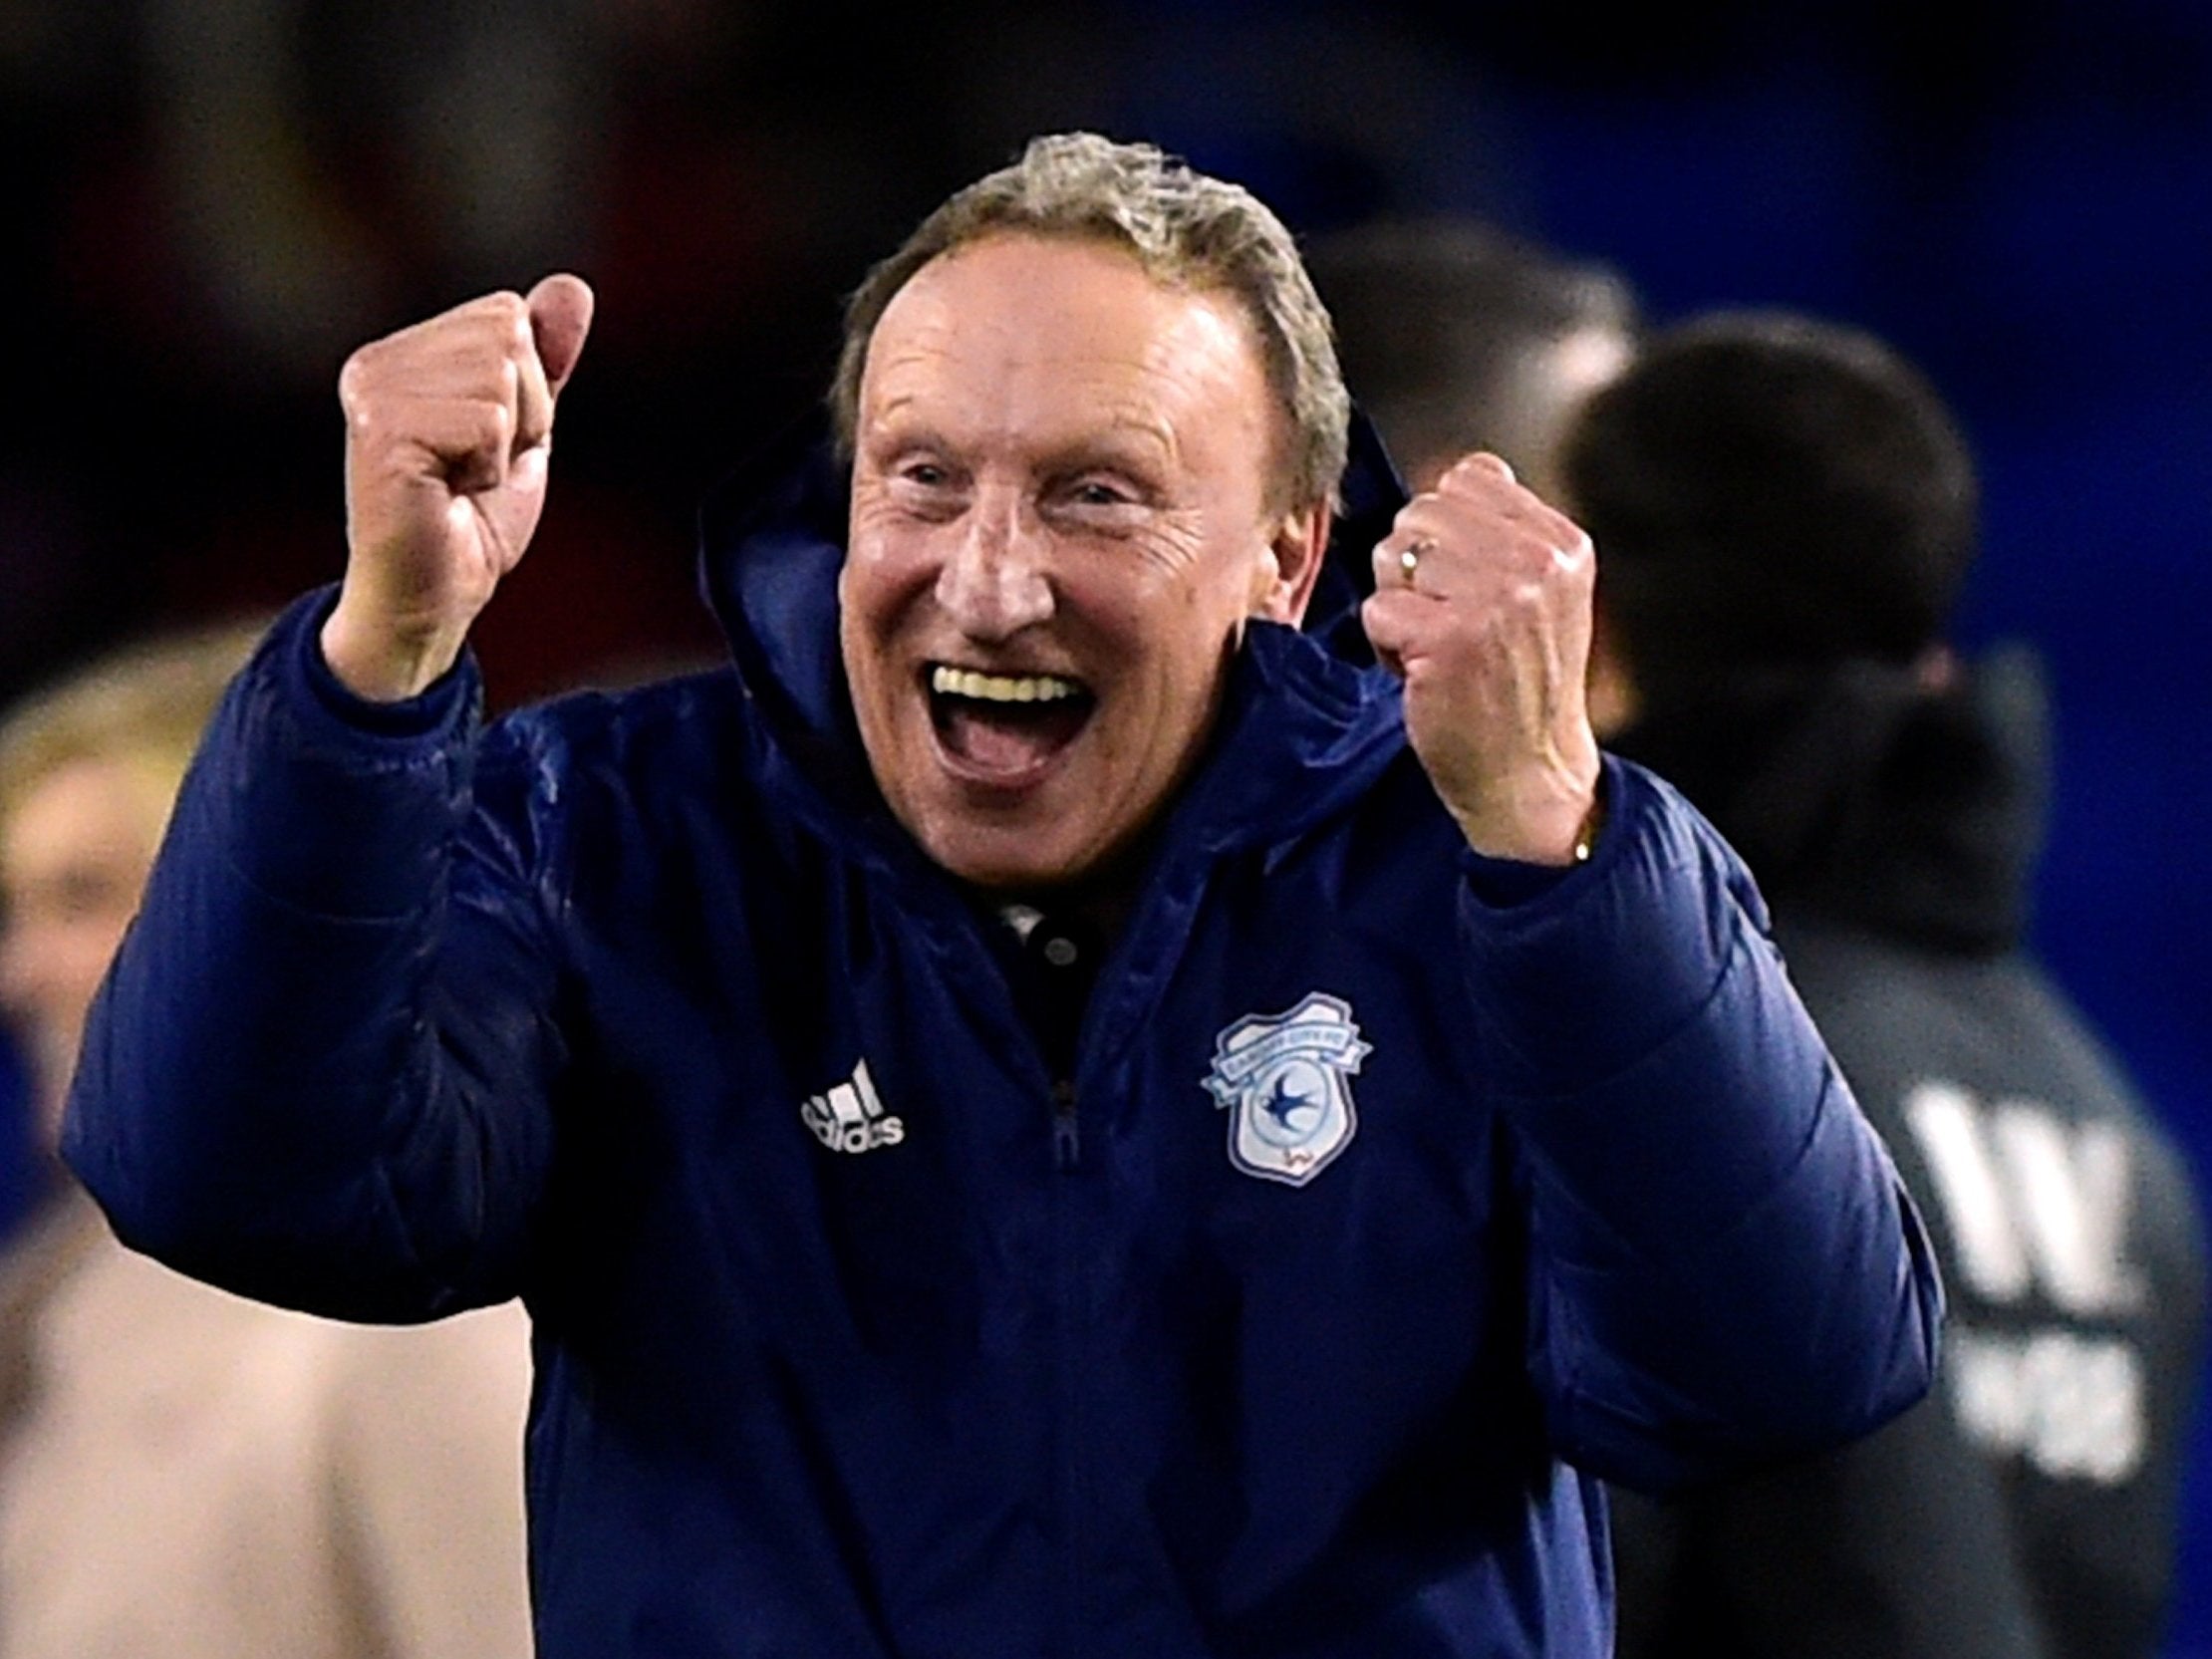 Neil Warnock celebrates Cardiff's victory over Wolves ahead of his 70th birthday